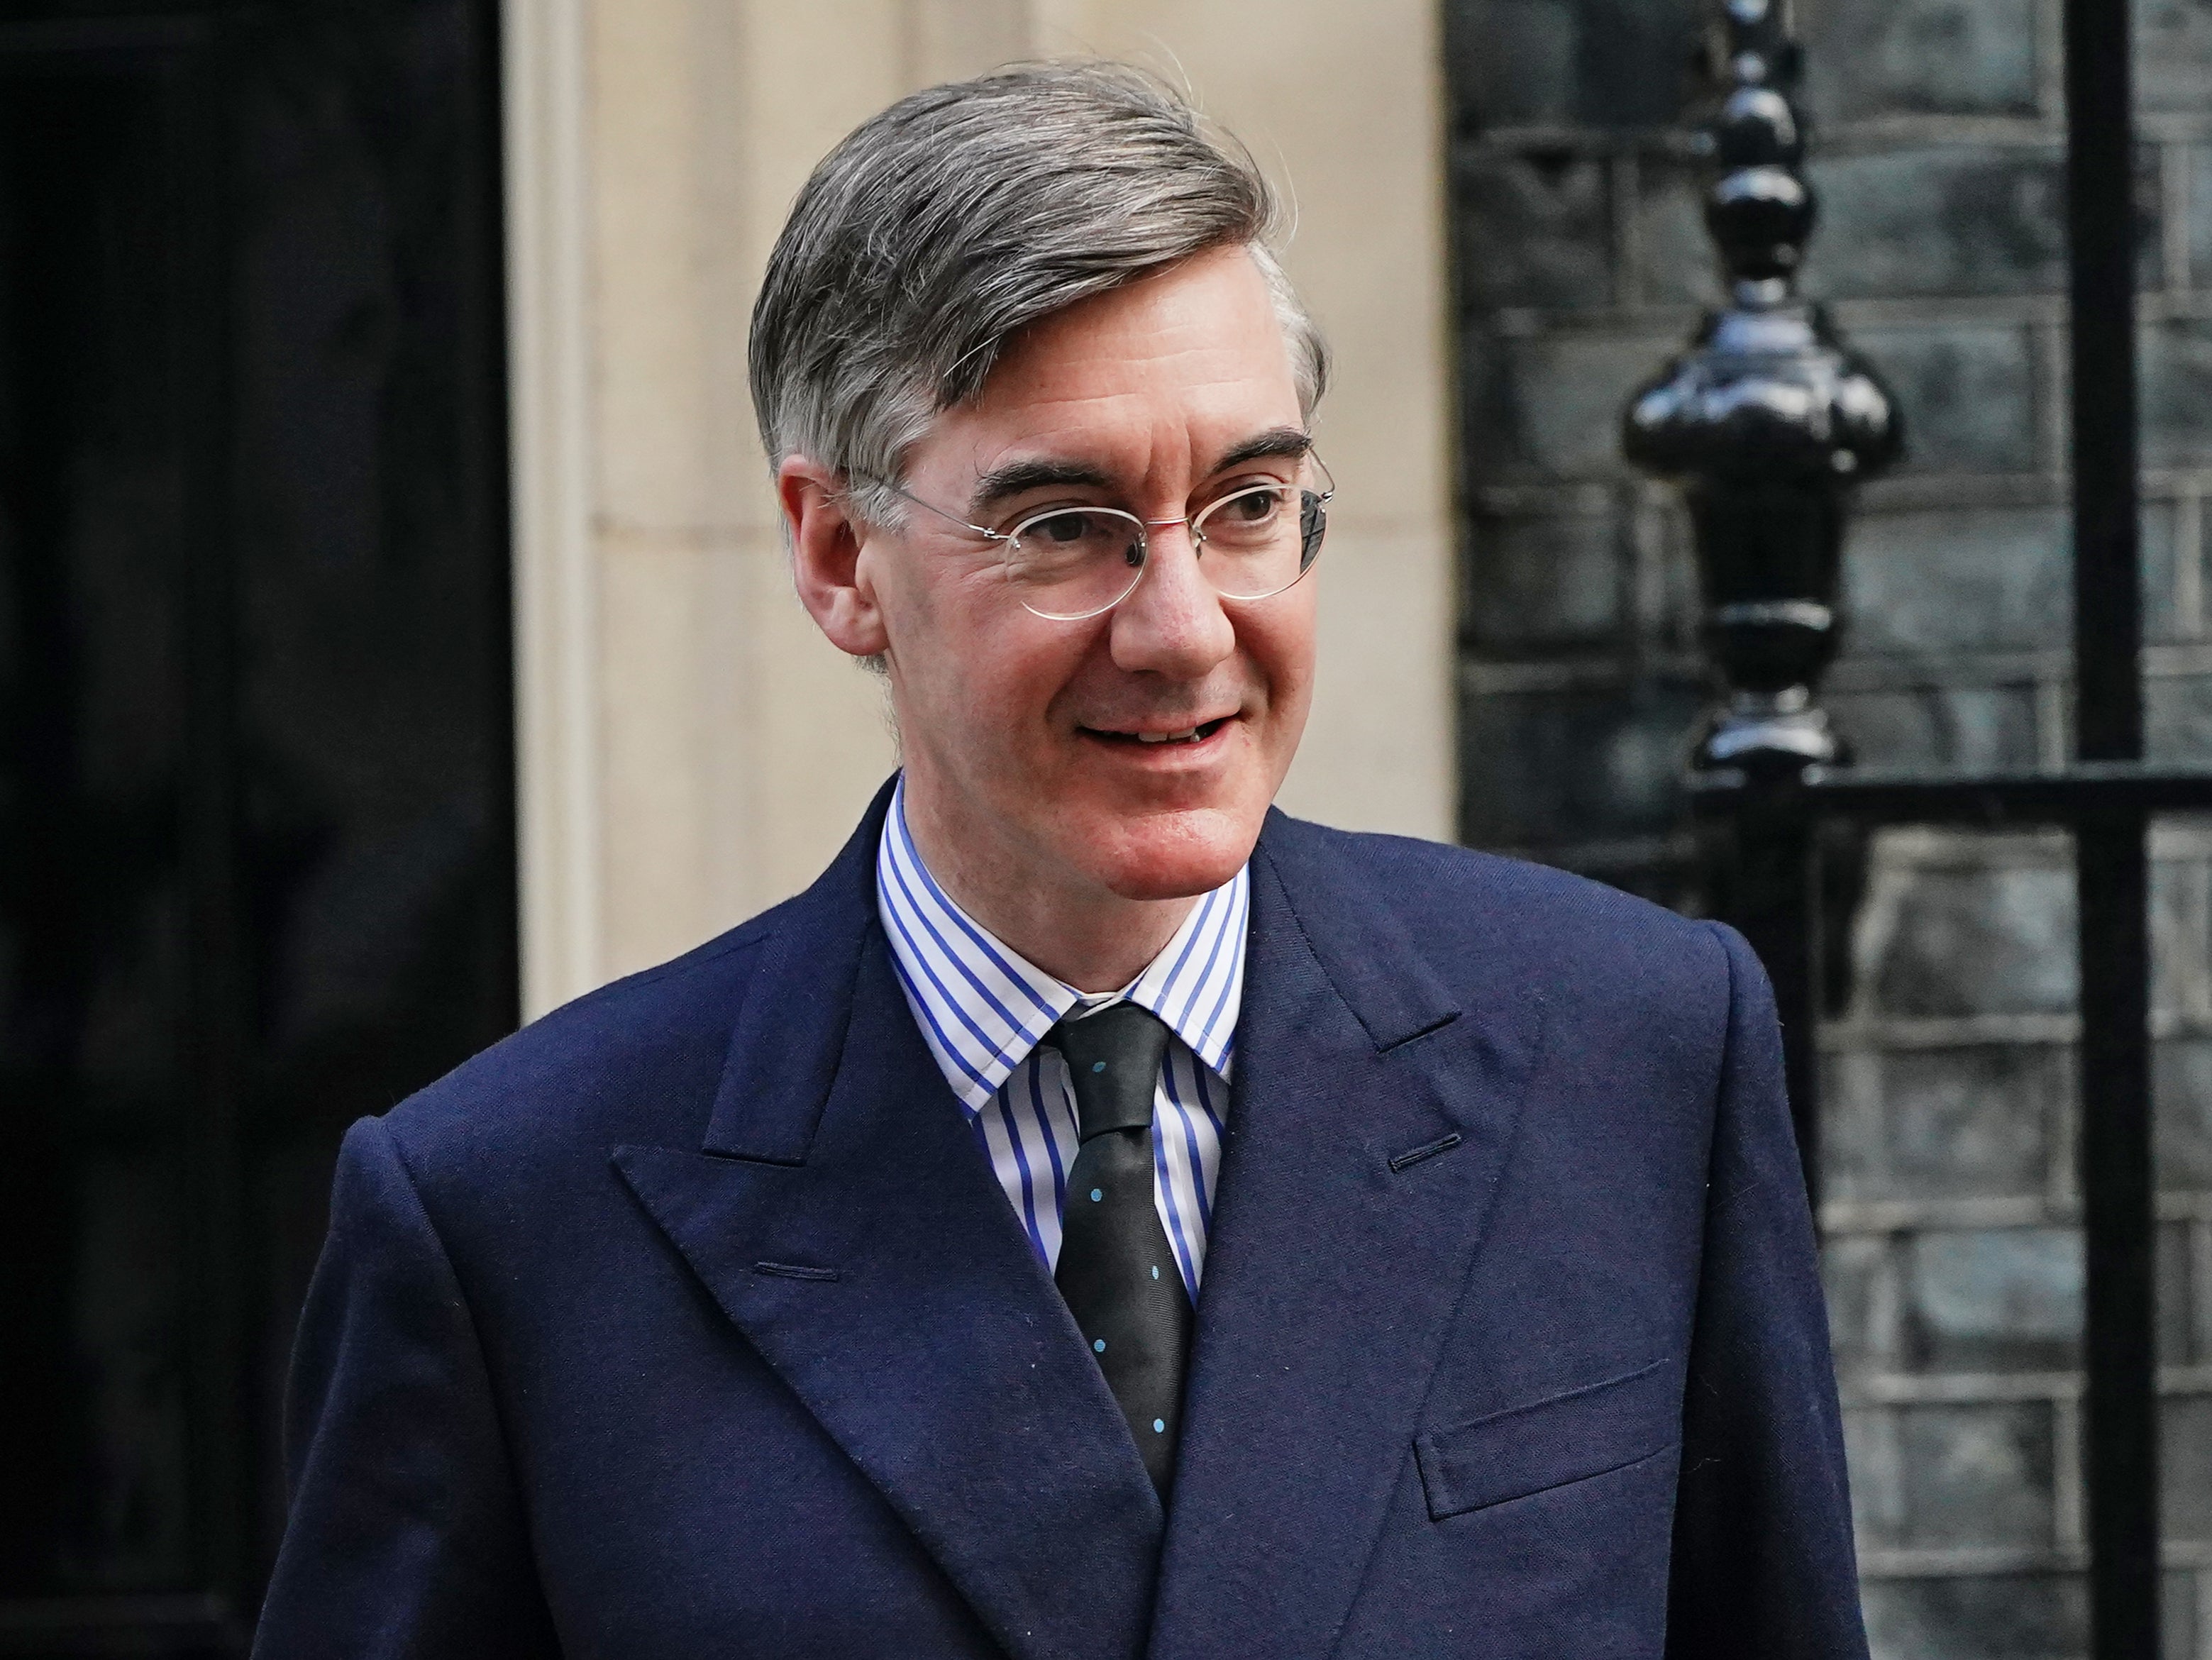 Efficiency minister Jacob Rees-Mogg is on drive to cut wasteful spending